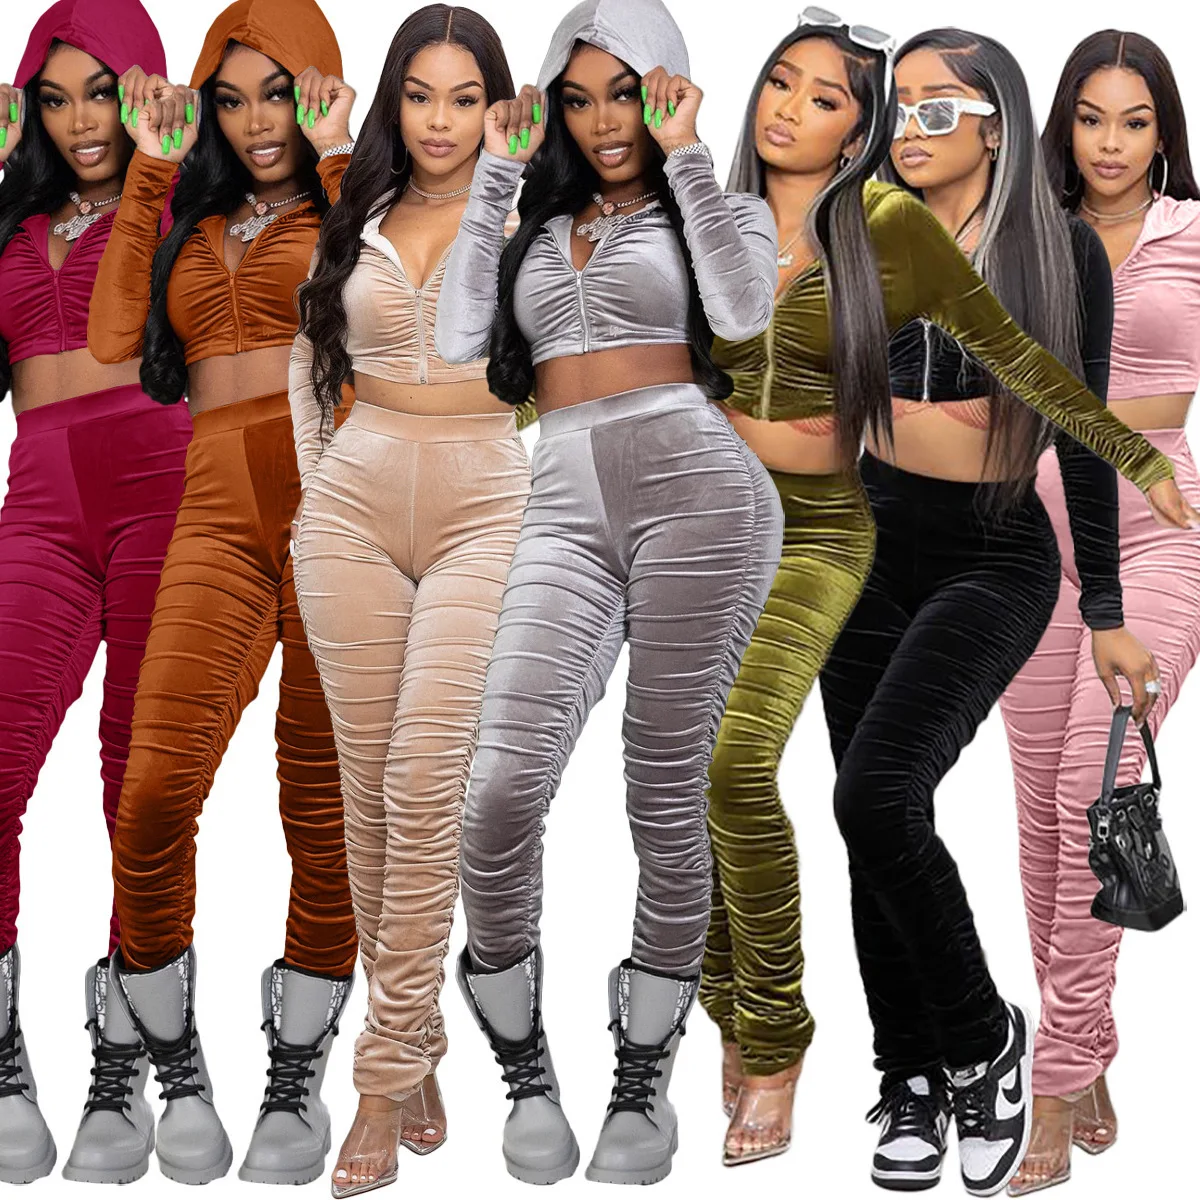 

Zoctuo Women Pant Sets Hooded Crop Tops 2 Piece Set Solid Stacked Pants Suits Outfits Sexy Fashion Clubwear Clothing Stretchy